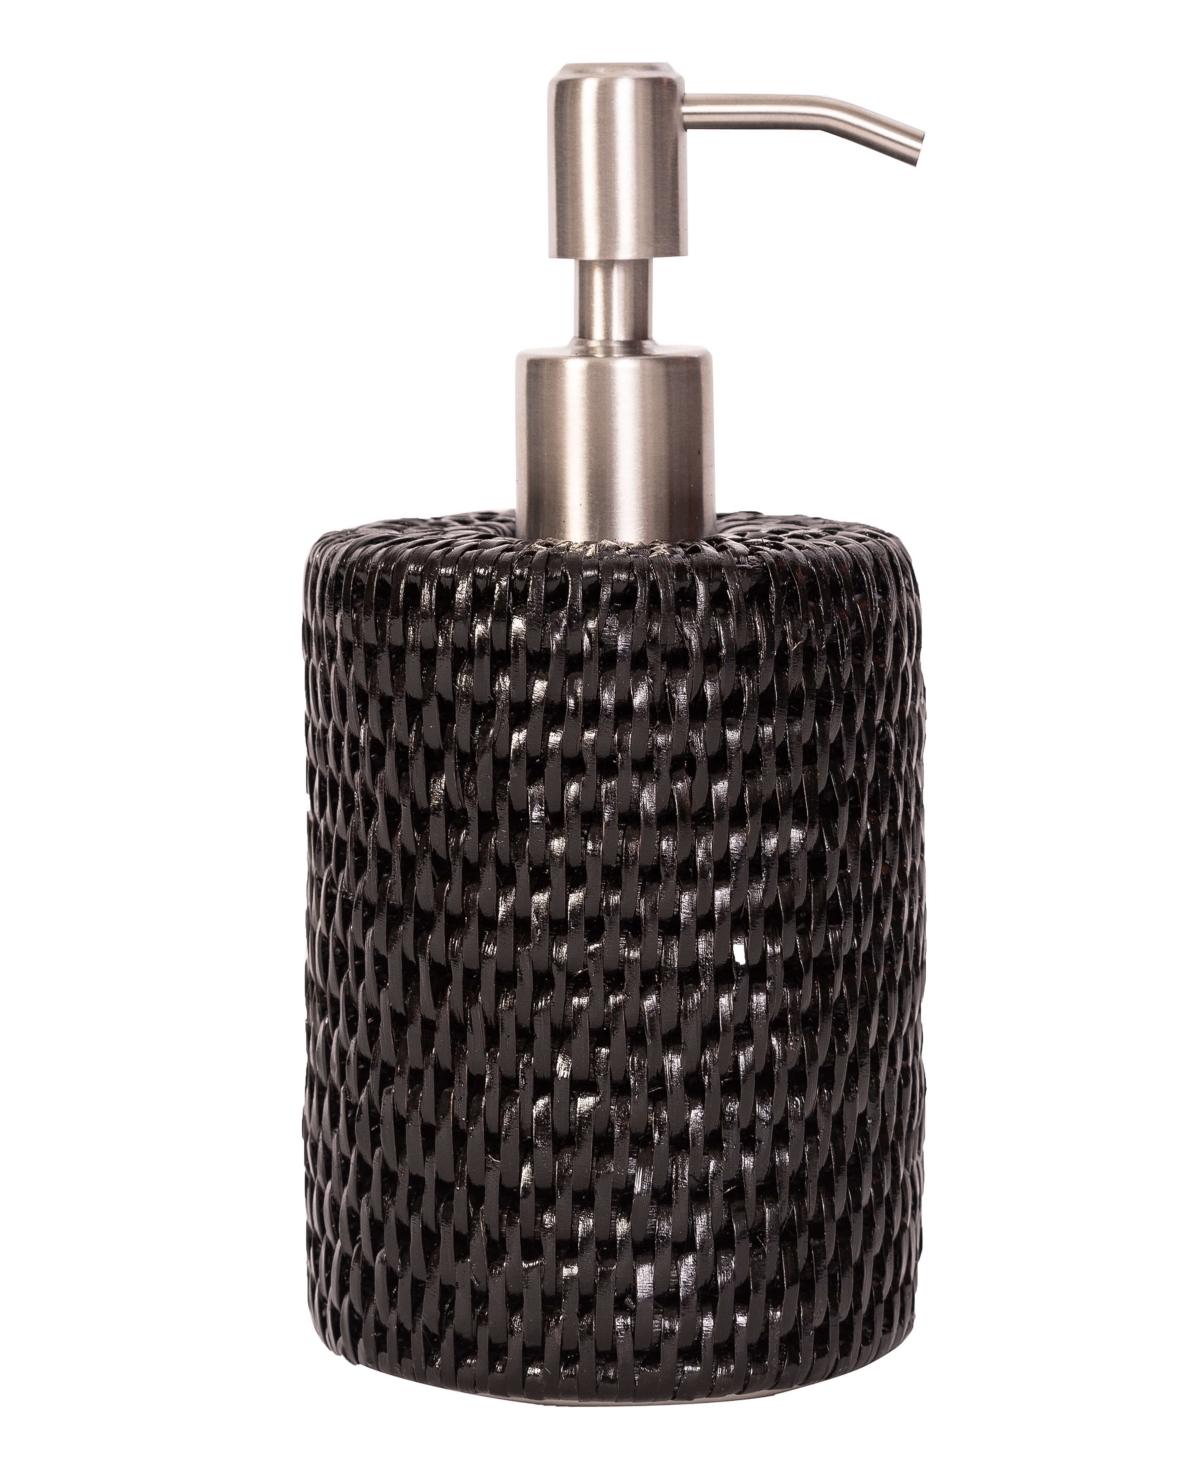 Artifacts Trading Company Artifacts Rattan Stainless Steel Polished Finish Soap Pump Dispenser In Tudor Black